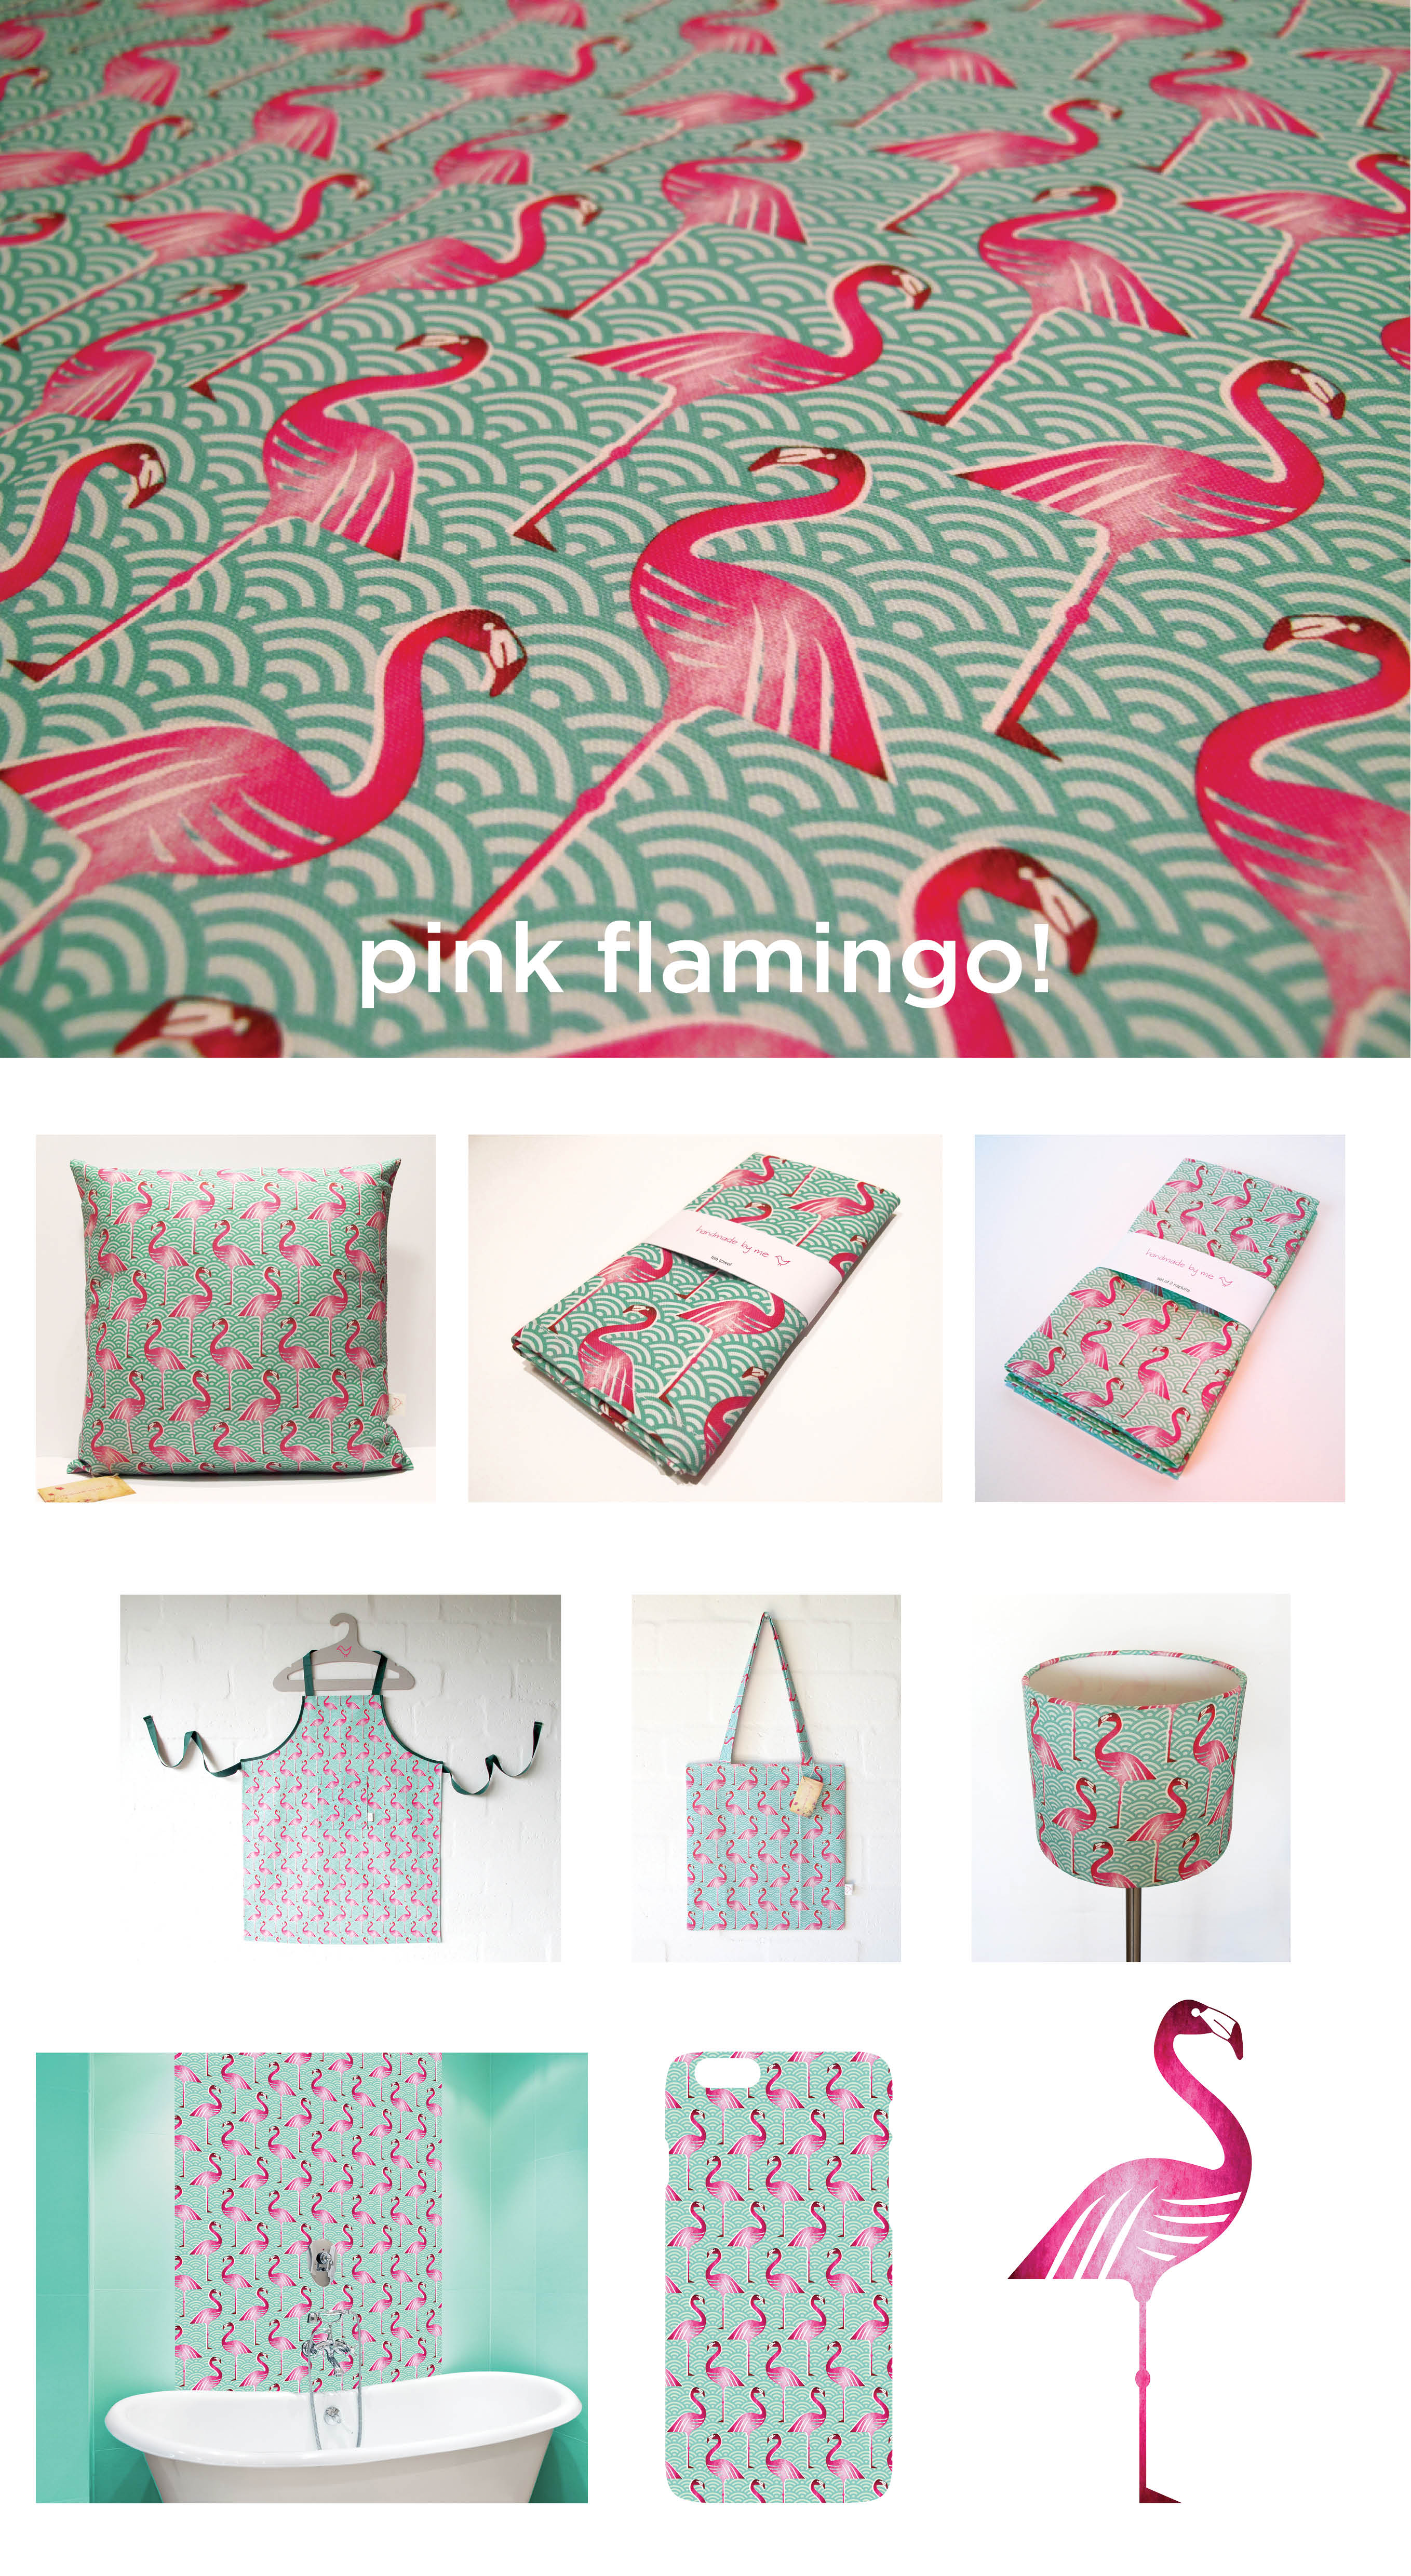 Find Out More About Us Website Handmadebyme Co Za